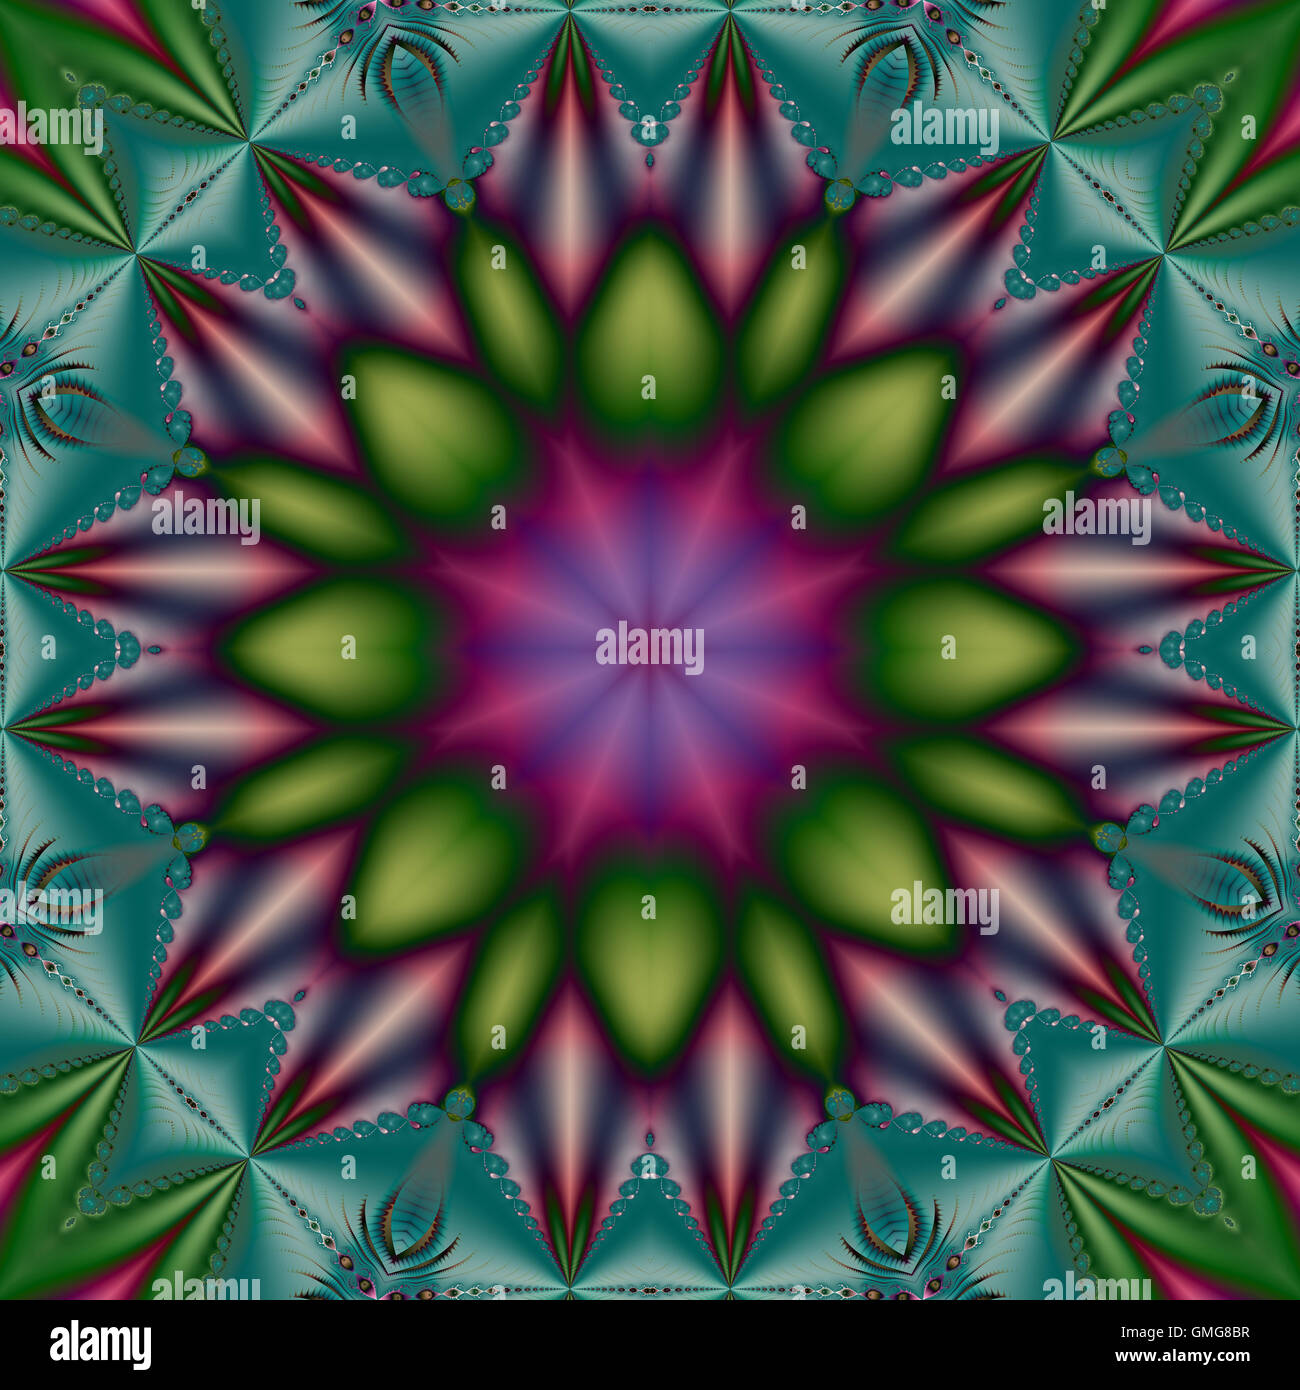 Digital fractal image in beautiful flower star shape with green, purple and blue symmetrical design with turquoise quilt effect Stock Photo